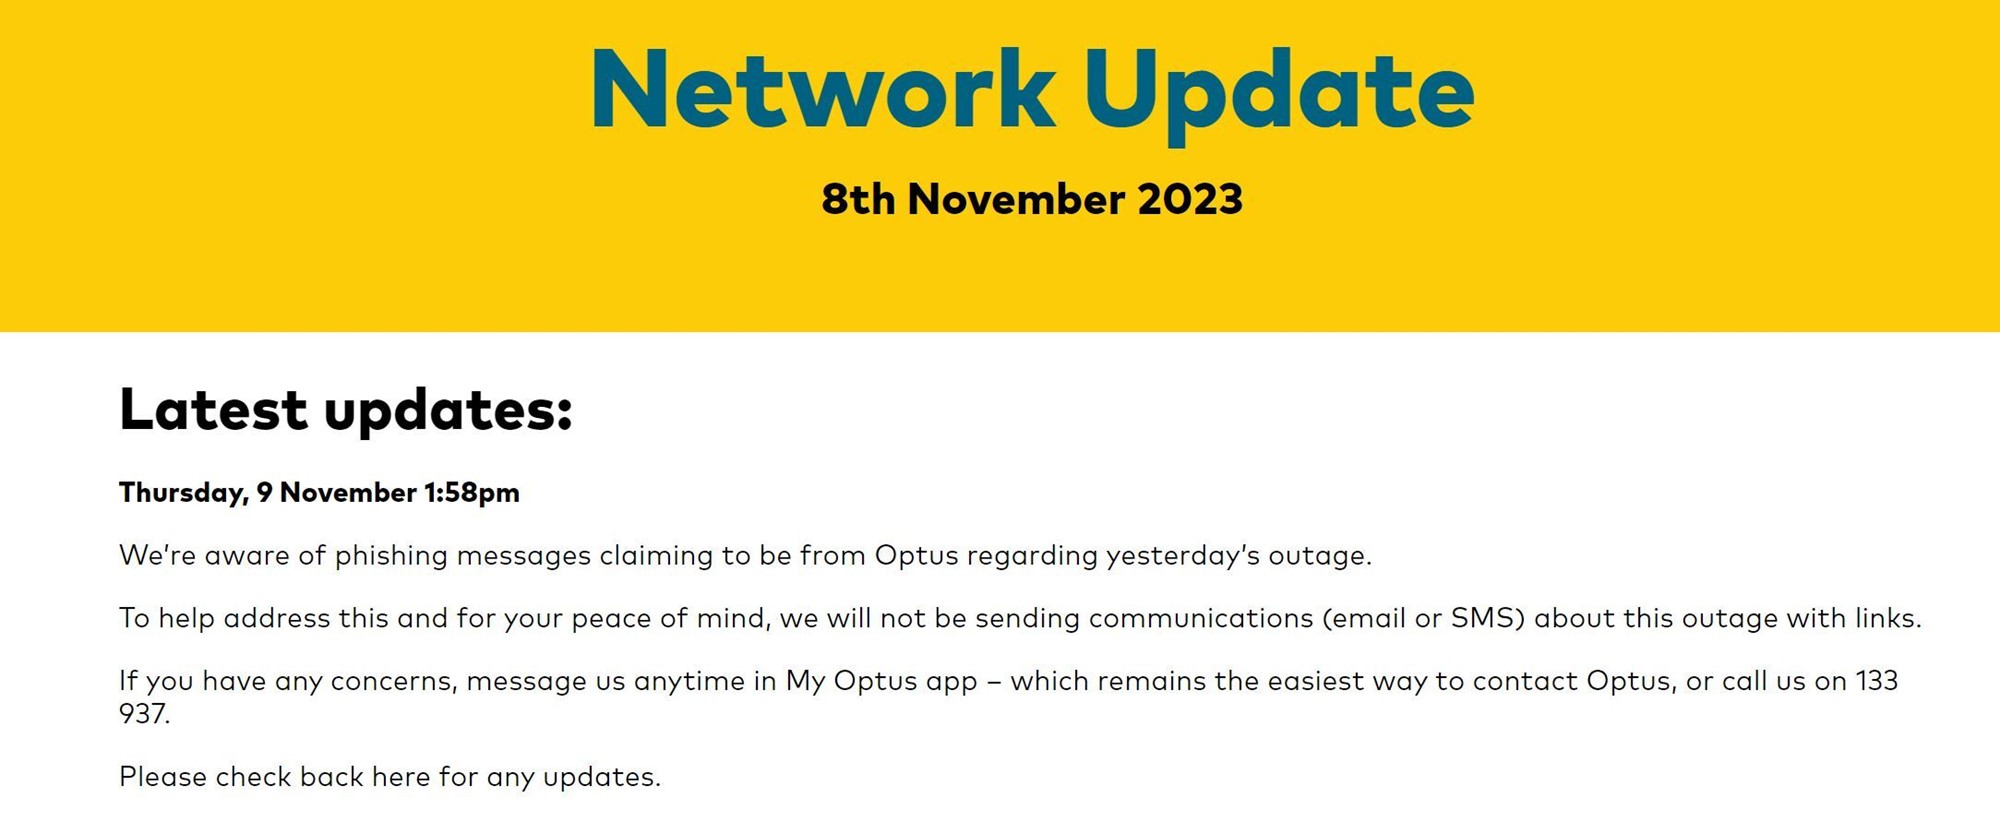 Thursday, 9 November 1:58pmWe’re aware of phishing messages claiming to be from Optus regarding yesterday’s outage.To help address this and for your peace of mind, we will not be sending communications (email or SMS) about this outage with links.If you have any concerns, message us anytime in My Optus app – which remains the easiest way to contact Optus, or call us on 133 937.Please check back here for any updates. 